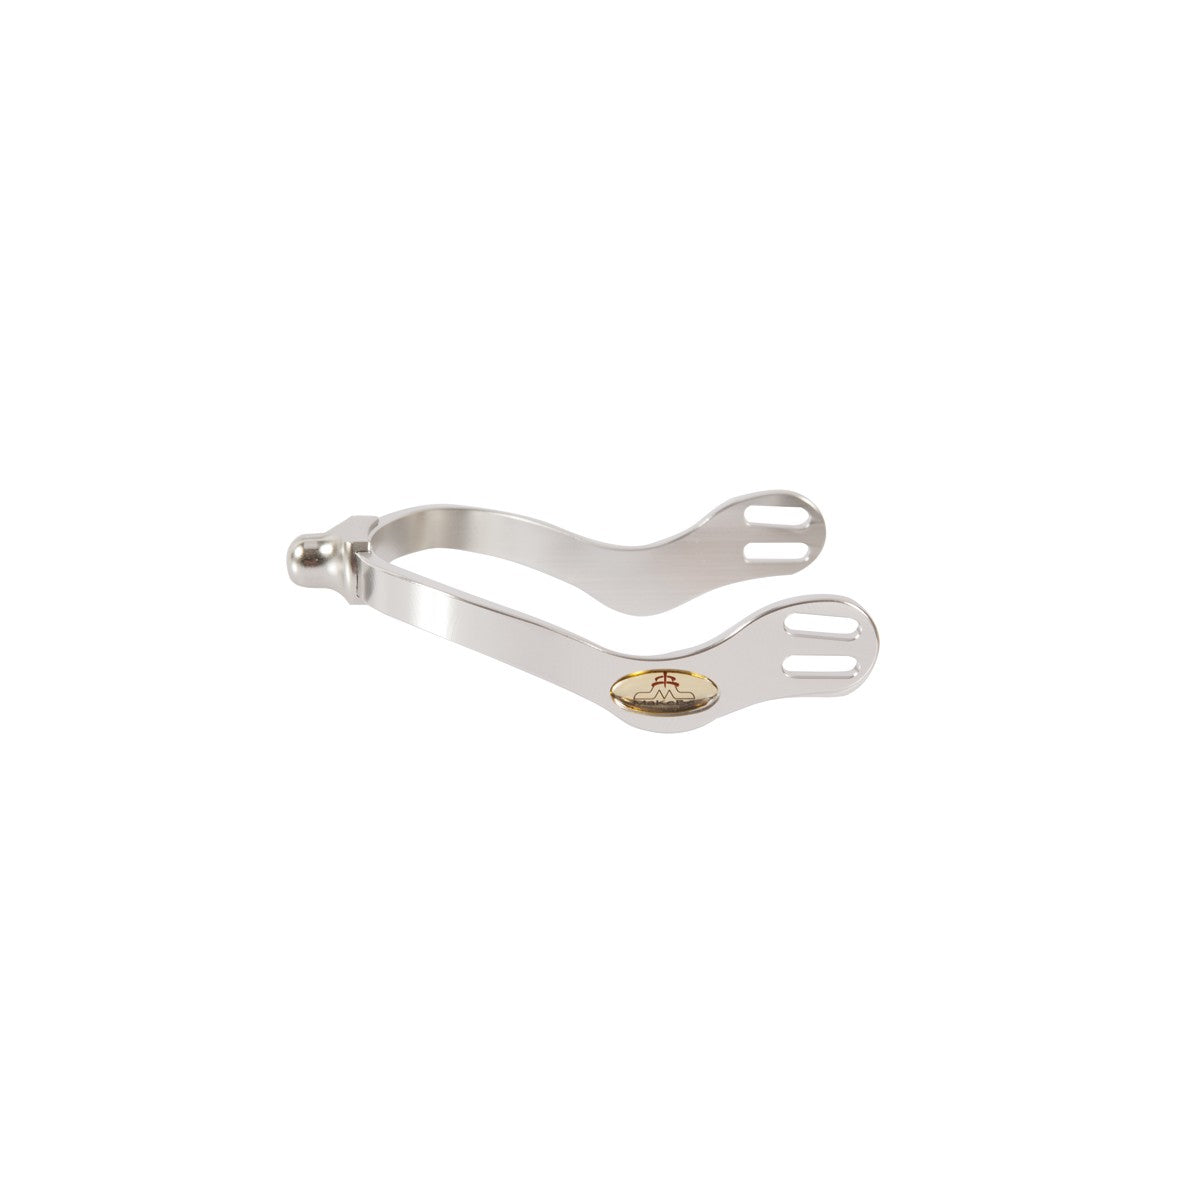 Spur with tooth rowel interchangeable kit | final interchangeable kit | final interchangeable | spur | technical | Makebe | equestrian | riding | horse | combinations of terminals | terminals | Lightweight | Durable | Ergonomic | silver |